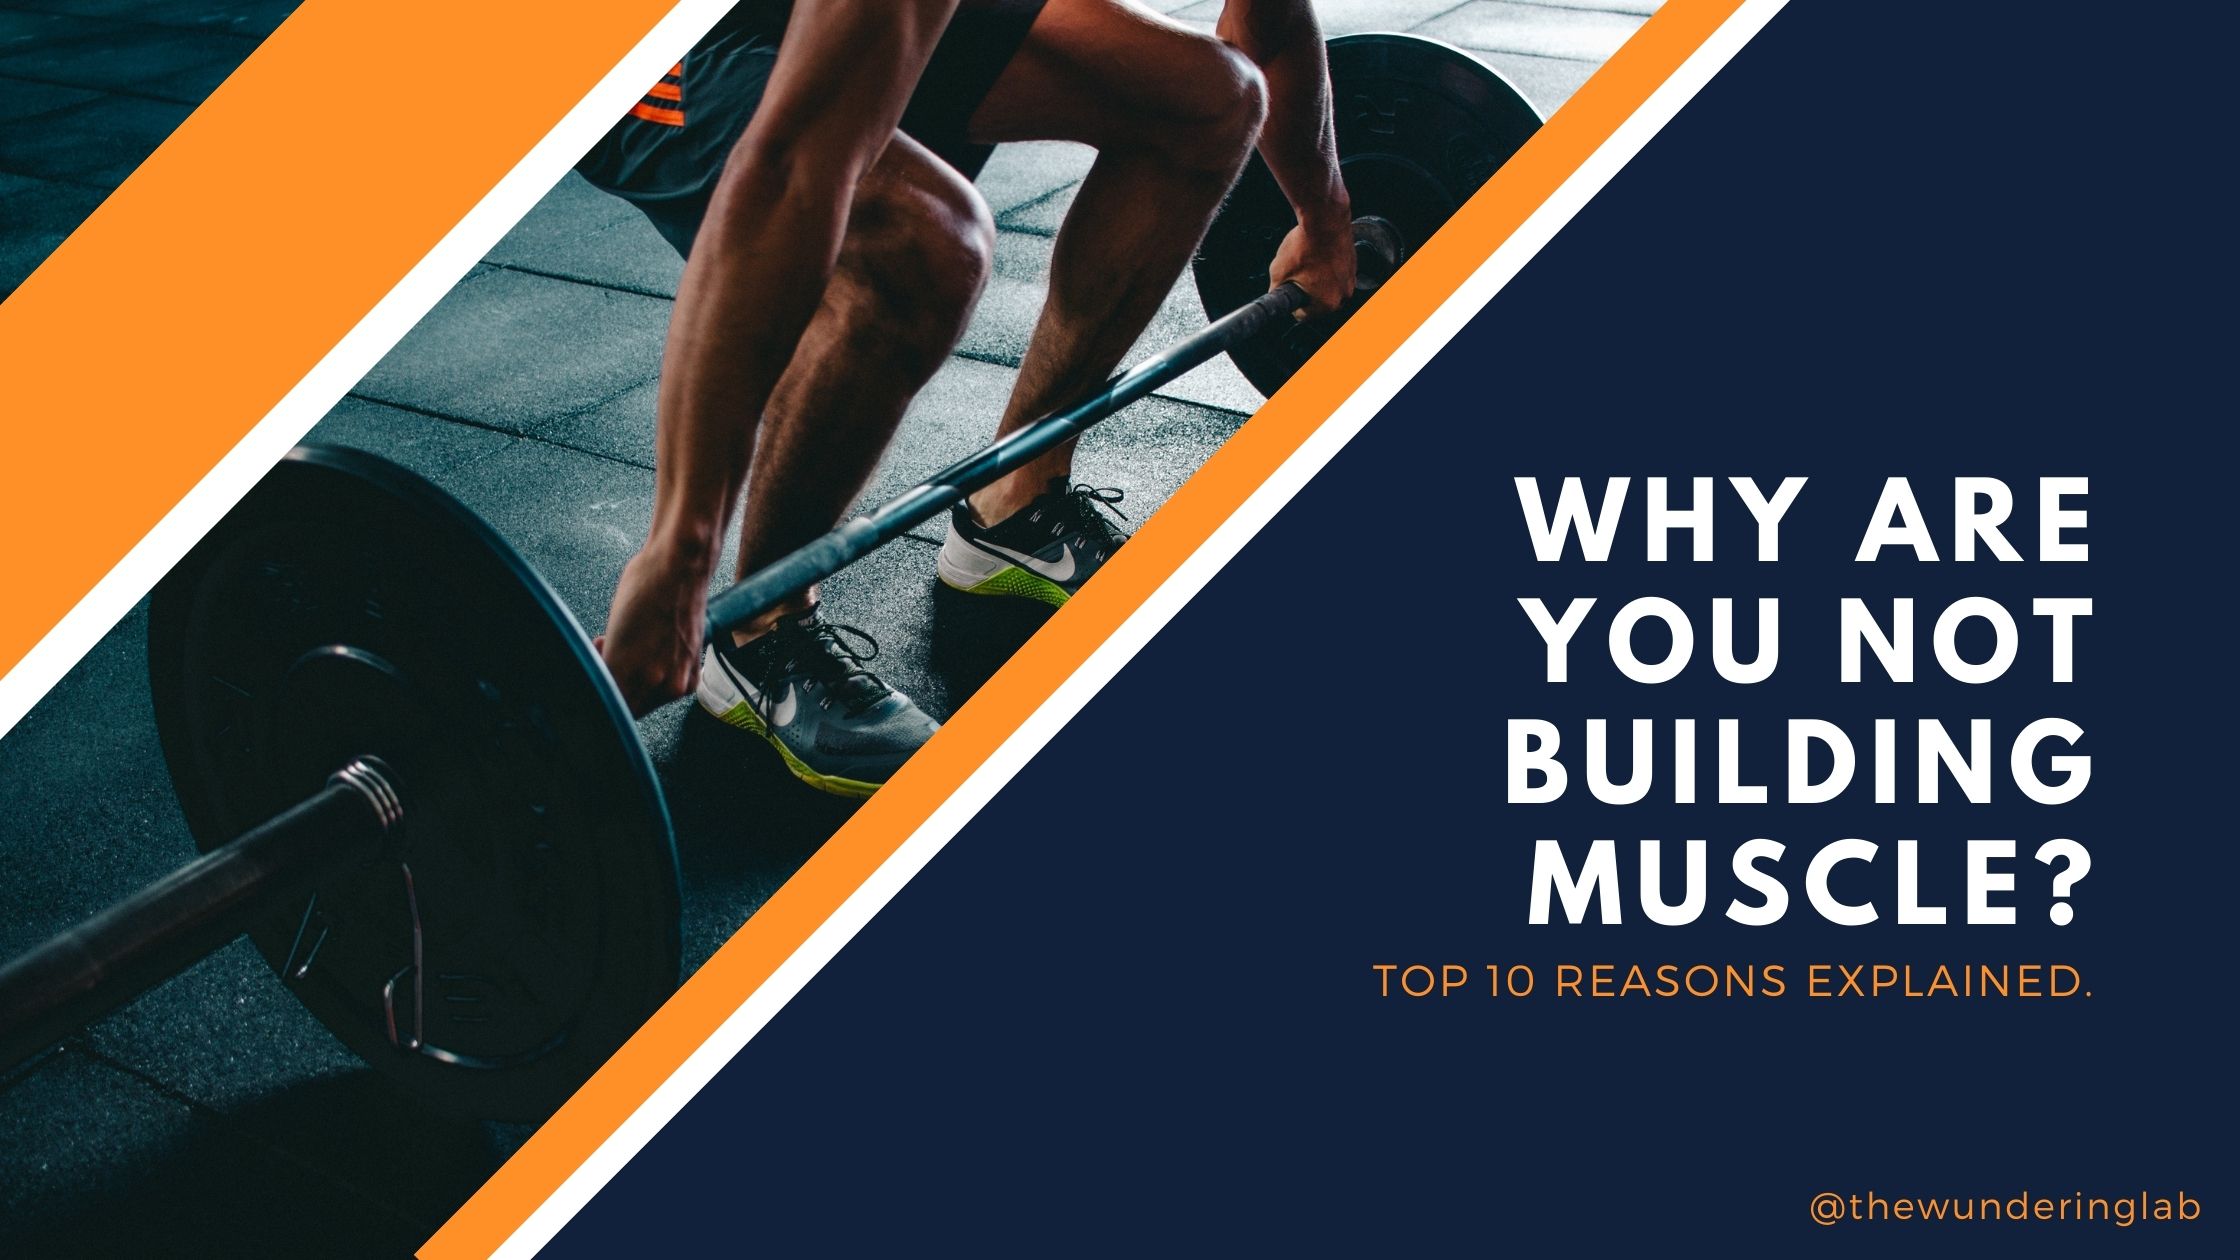 Why am I not building muscle? Top 10 reasons!